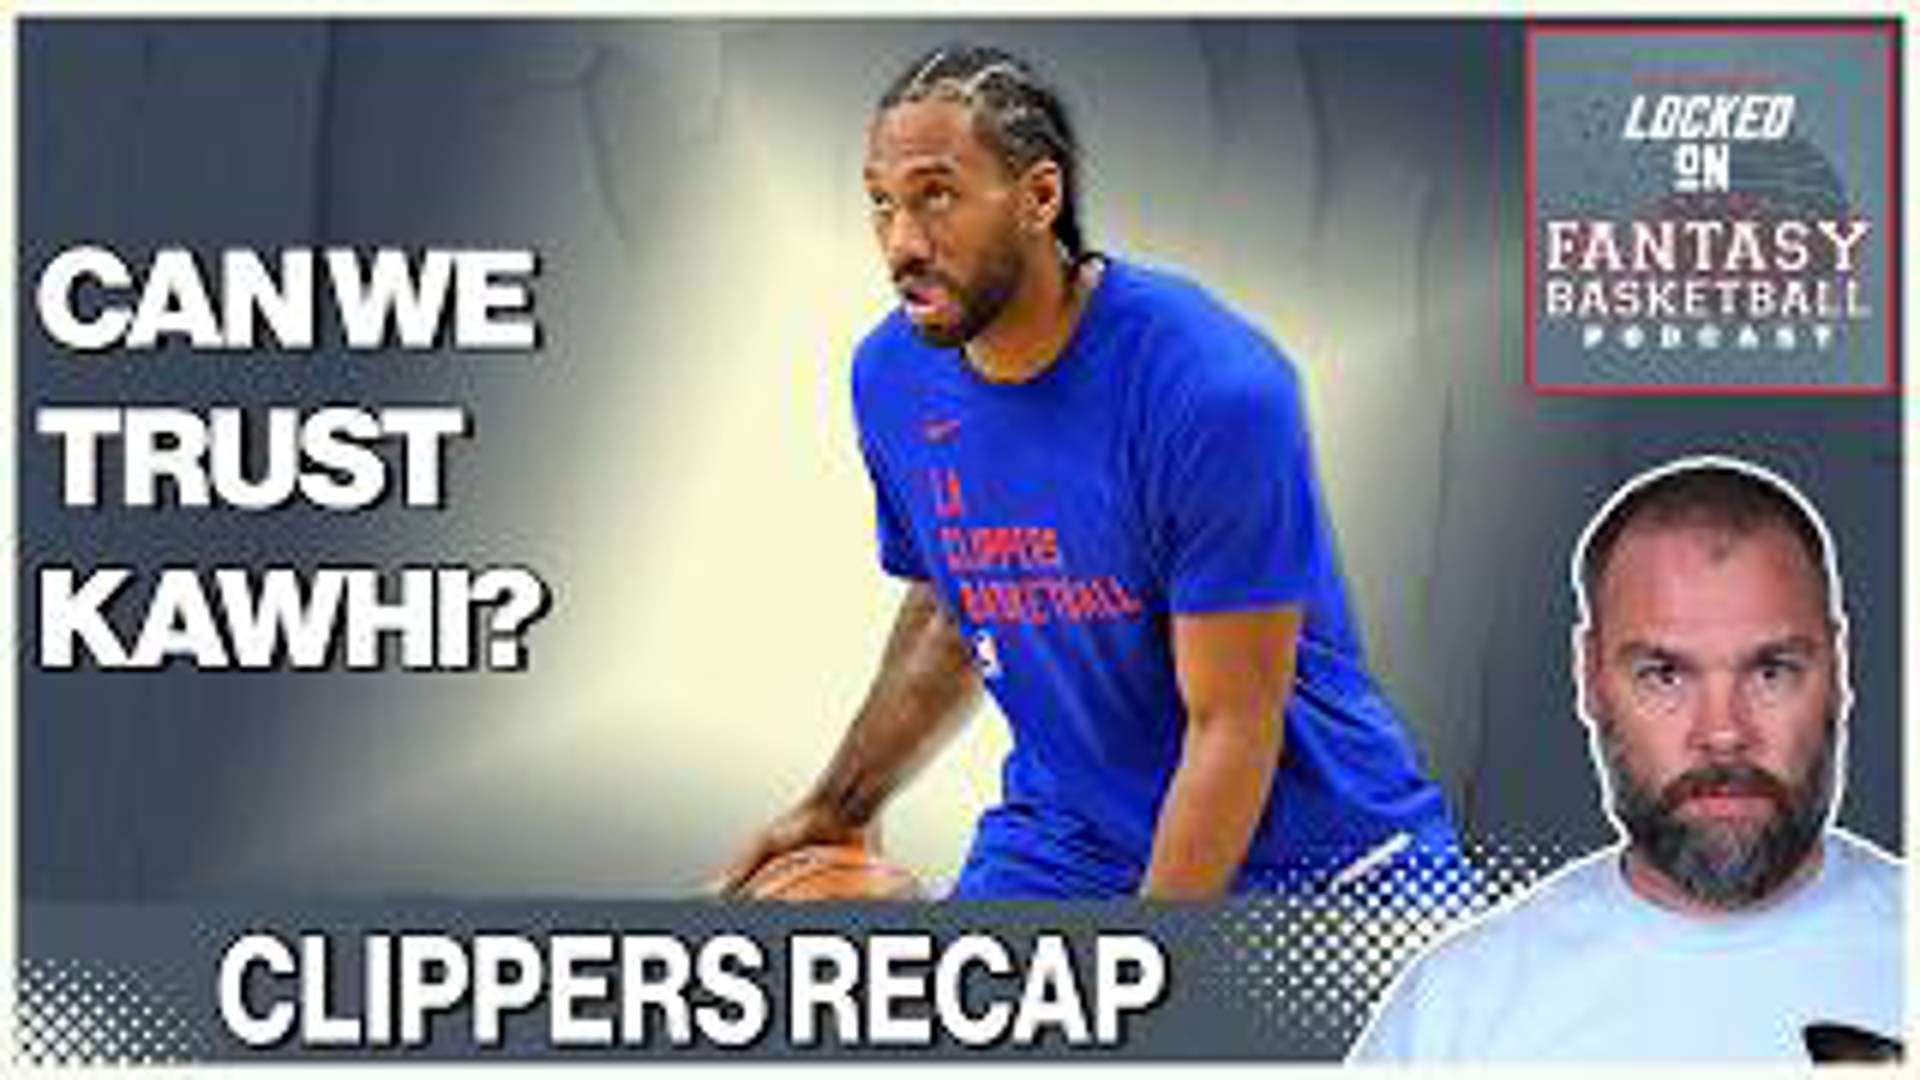 Join Josh Lloyd as he dives into the Los Angeles Clippers' season, analyzing their ups and downs, major trades, and injury impacts